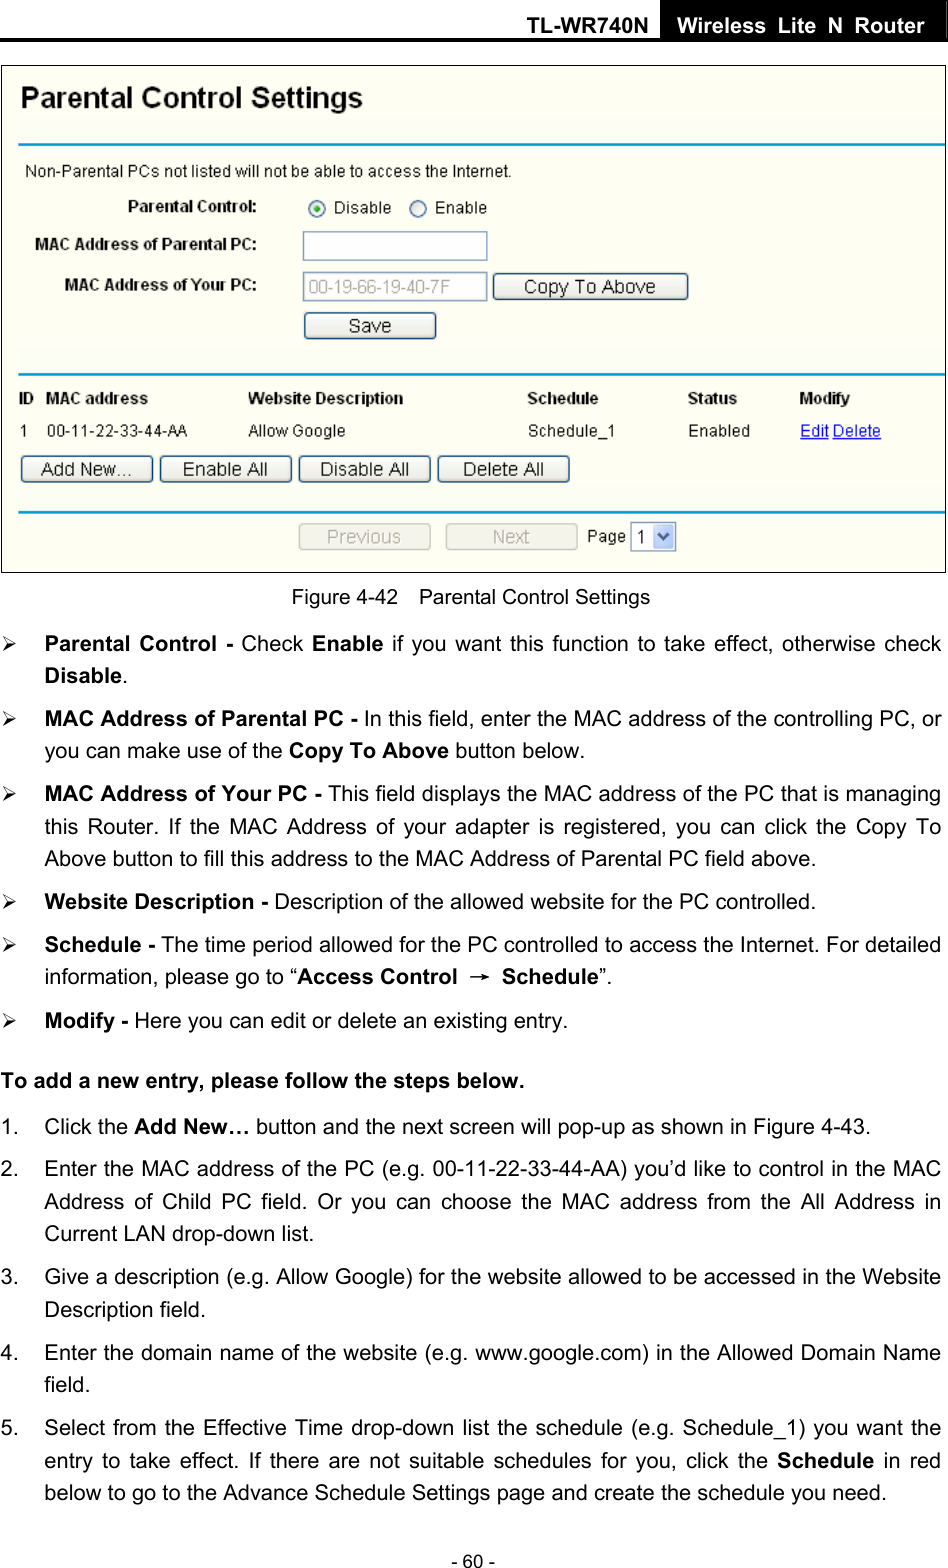 TL-WR740N Wireless Lite N Router  - 60 -  Figure 4-42    Parental Control Settings ¾ Parental Control - Check Enable if you want this function to take effect, otherwise check Disable.  ¾ MAC Address of Parental PC - In this field, enter the MAC address of the controlling PC, or you can make use of the Copy To Above button below.   ¾ MAC Address of Your PC - This field displays the MAC address of the PC that is managing this Router. If the MAC Address of your adapter is registered, you can click the Copy To Above button to fill this address to the MAC Address of Parental PC field above.   ¾ Website Description - Description of the allowed website for the PC controlled.   ¾ Schedule - The time period allowed for the PC controlled to access the Internet. For detailed information, please go to “Access Control  → Schedule”.  ¾ Modify - Here you can edit or delete an existing entry.   To add a new entry, please follow the steps below. 1. Click the Add New… button and the next screen will pop-up as shown in Figure 4-43. 2.  Enter the MAC address of the PC (e.g. 00-11-22-33-44-AA) you’d like to control in the MAC Address of Child PC field. Or you can choose the MAC address from the All Address in Current LAN drop-down list. 3.  Give a description (e.g. Allow Google) for the website allowed to be accessed in the Website Description field. 4.  Enter the domain name of the website (e.g. www.google.com) in the Allowed Domain Name field. 5.  Select from the Effective Time drop-down list the schedule (e.g. Schedule_1) you want the entry to take effect. If there are not suitable schedules for you, click the Schedule  in red below to go to the Advance Schedule Settings page and create the schedule you need. 